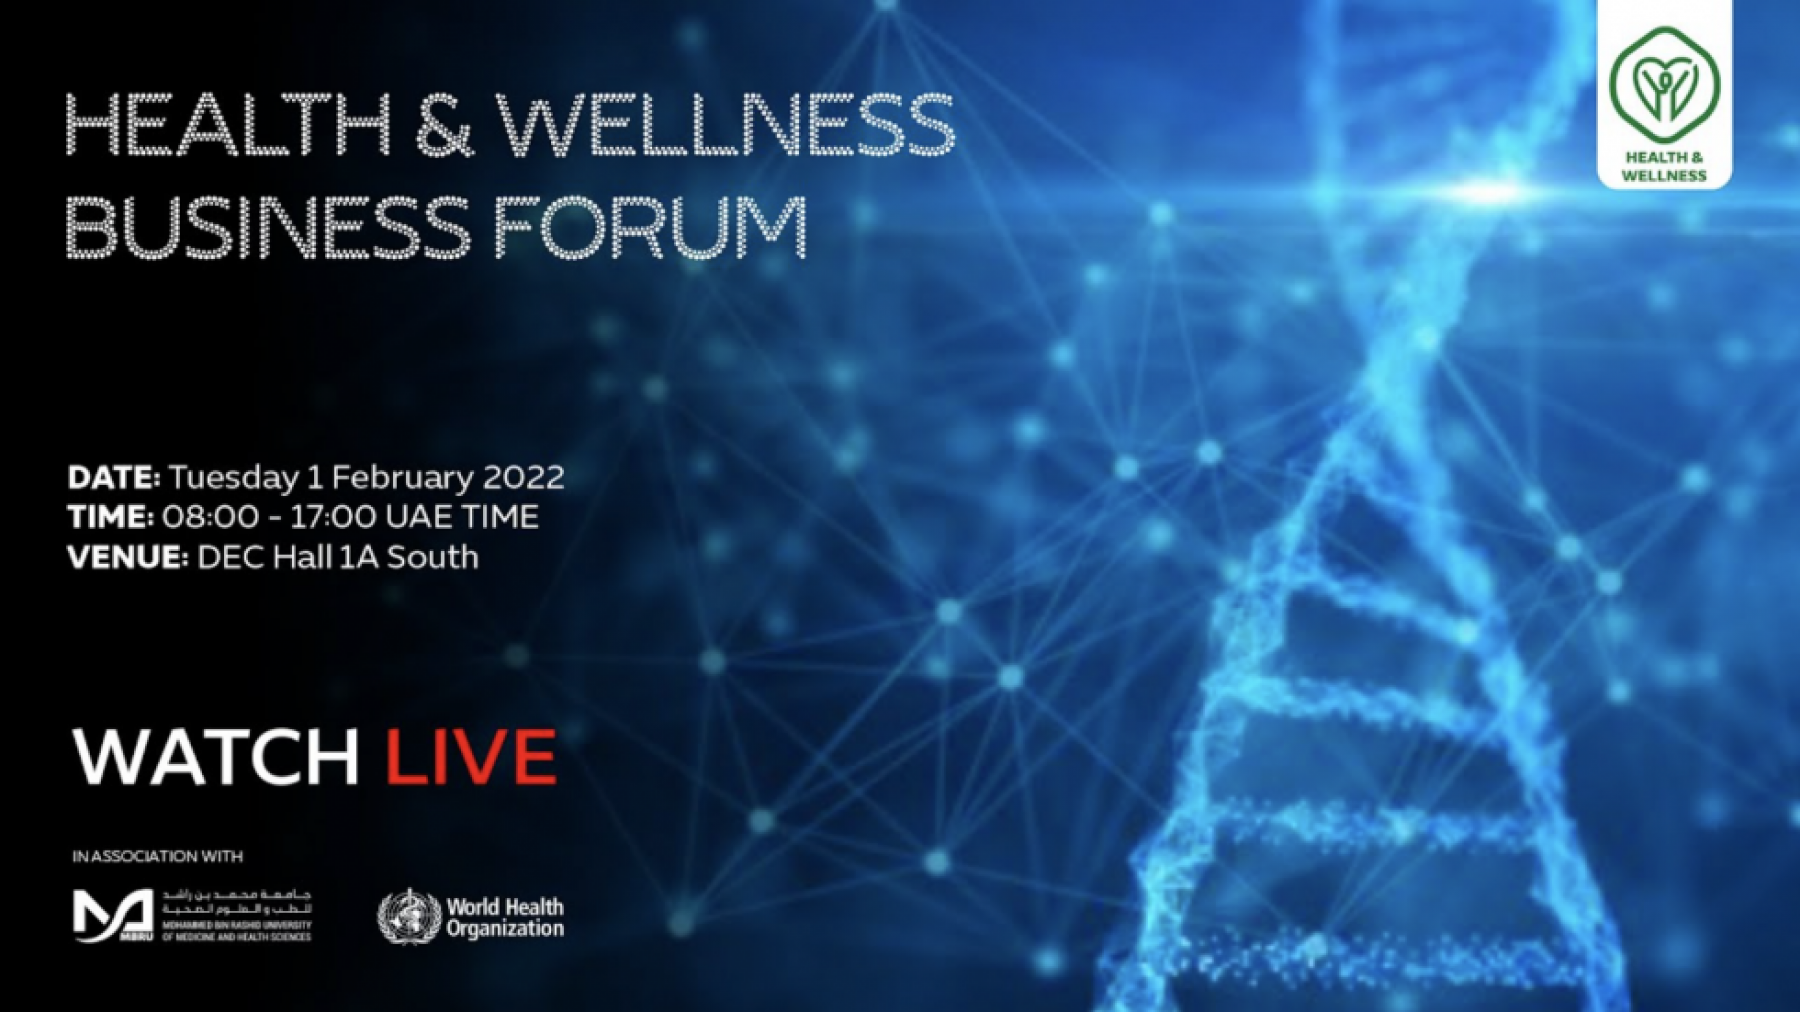 Cuomo Foundation participates in panel discussion at Health & Wellness week – Expo2020, Dubai